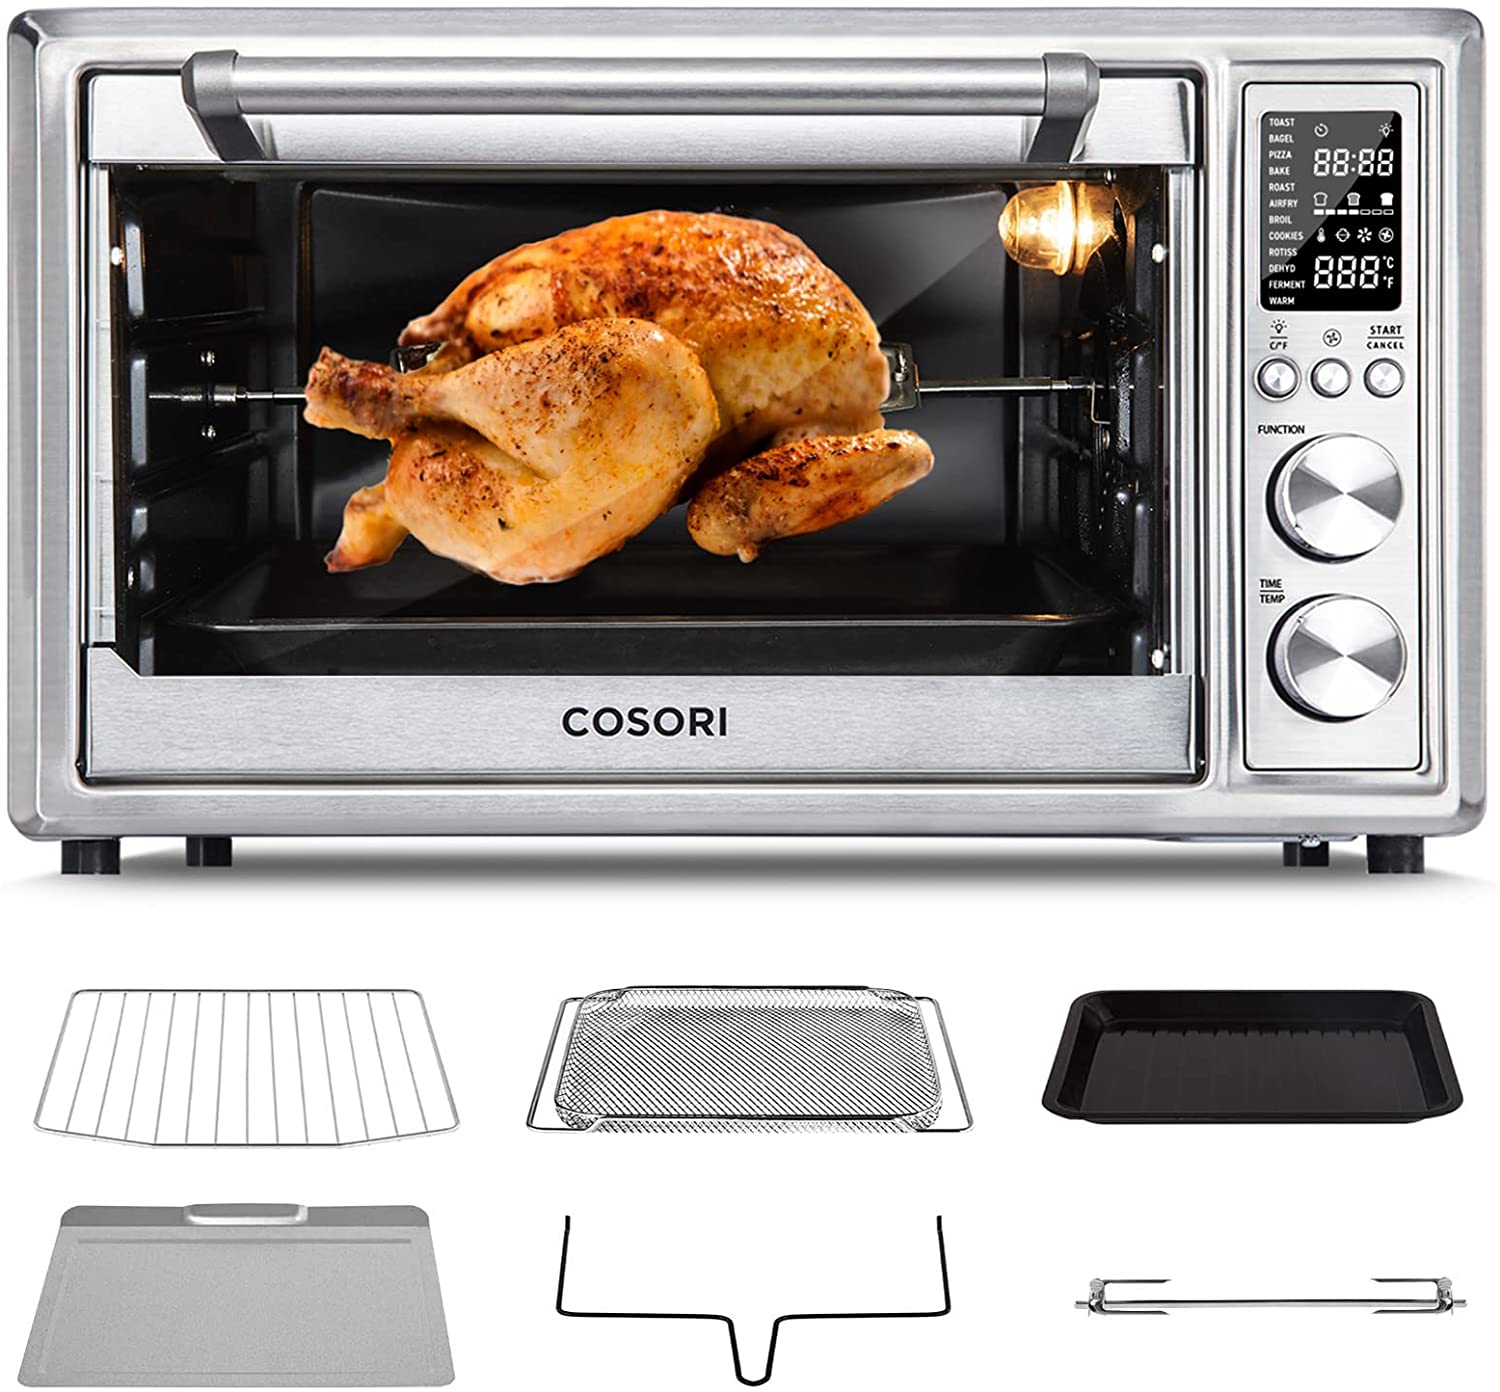 https://www.dontwasteyourmoney.com/wp-content/uploads/2020/02/cosori-12-in-1-convection-toaster-oven-1.jpg